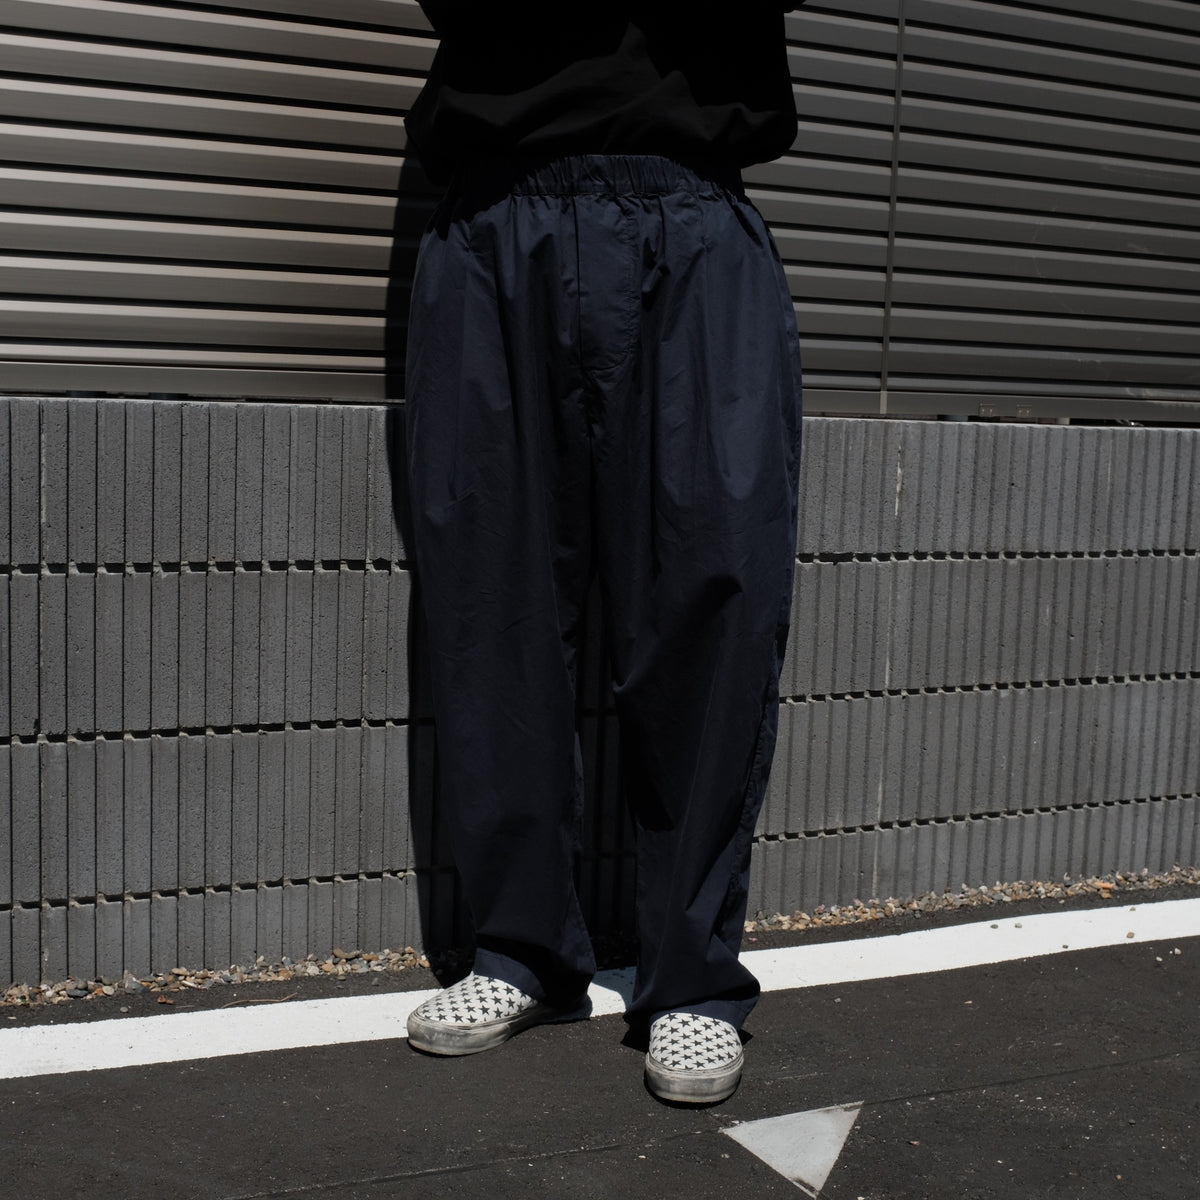 GREI. / PLEATED CRUISER PANT ENZYME WASHED POPLIN MIDNIGHT BLUE